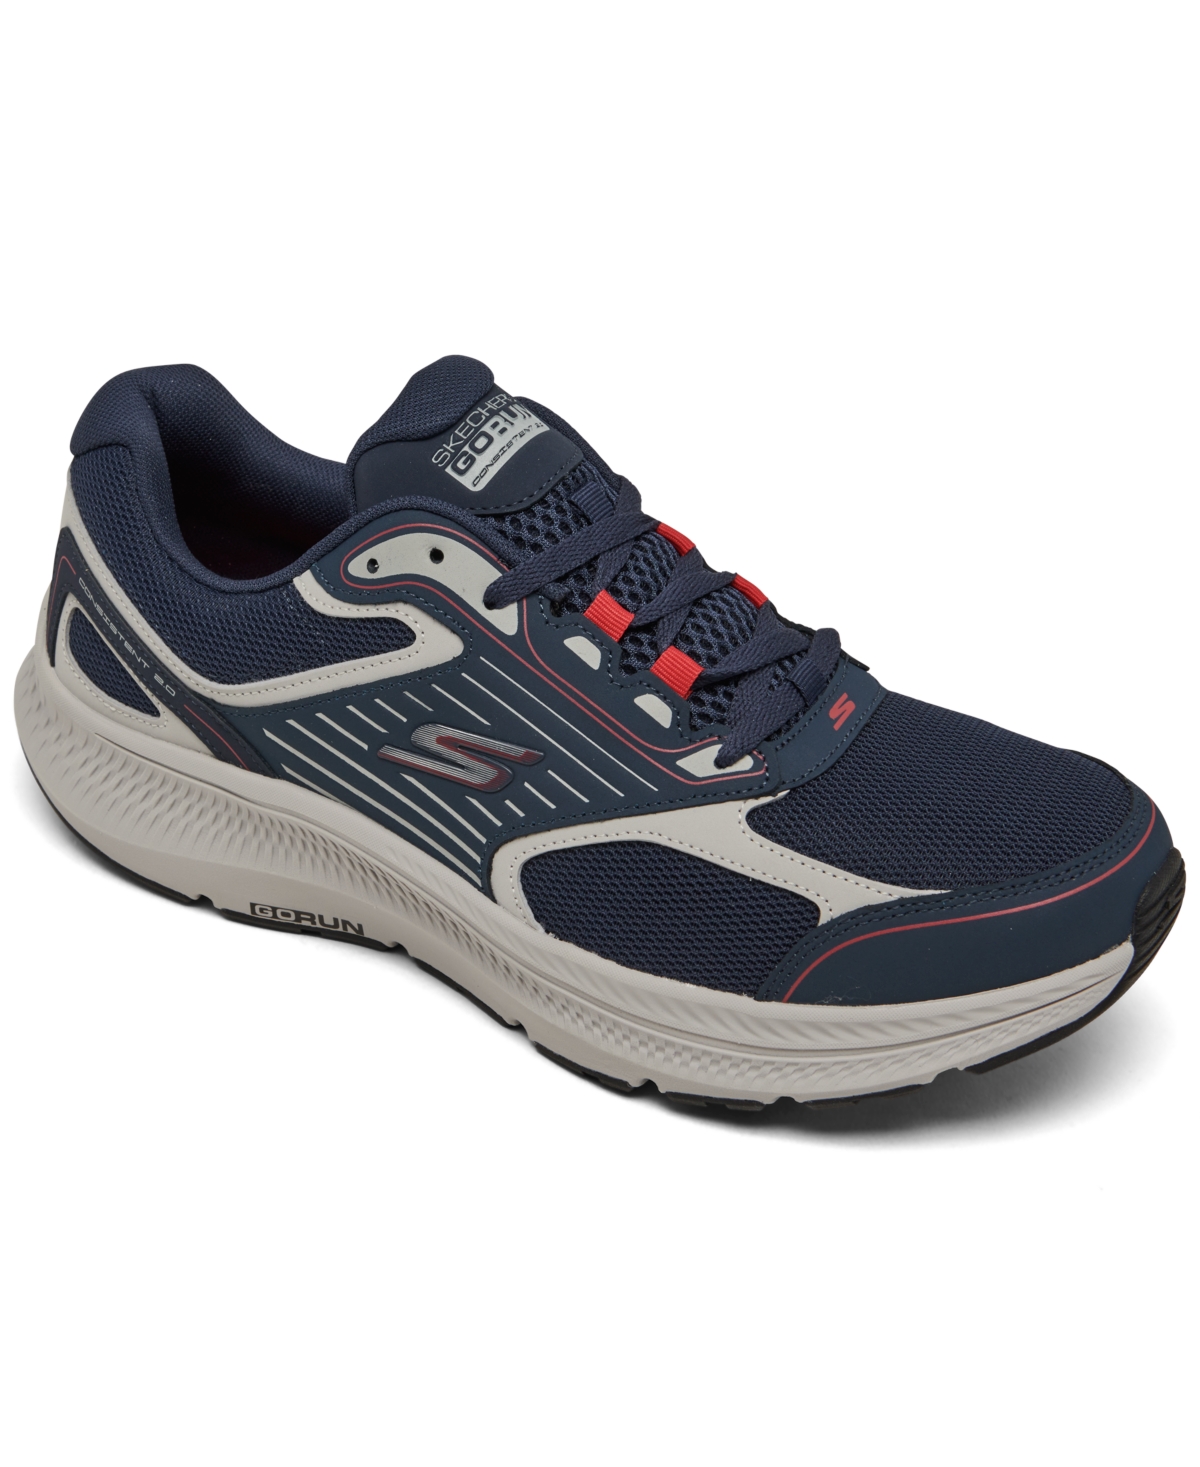 Men's Go Run Consistent 2.0 Running Sneakers from Finish Line - Navy